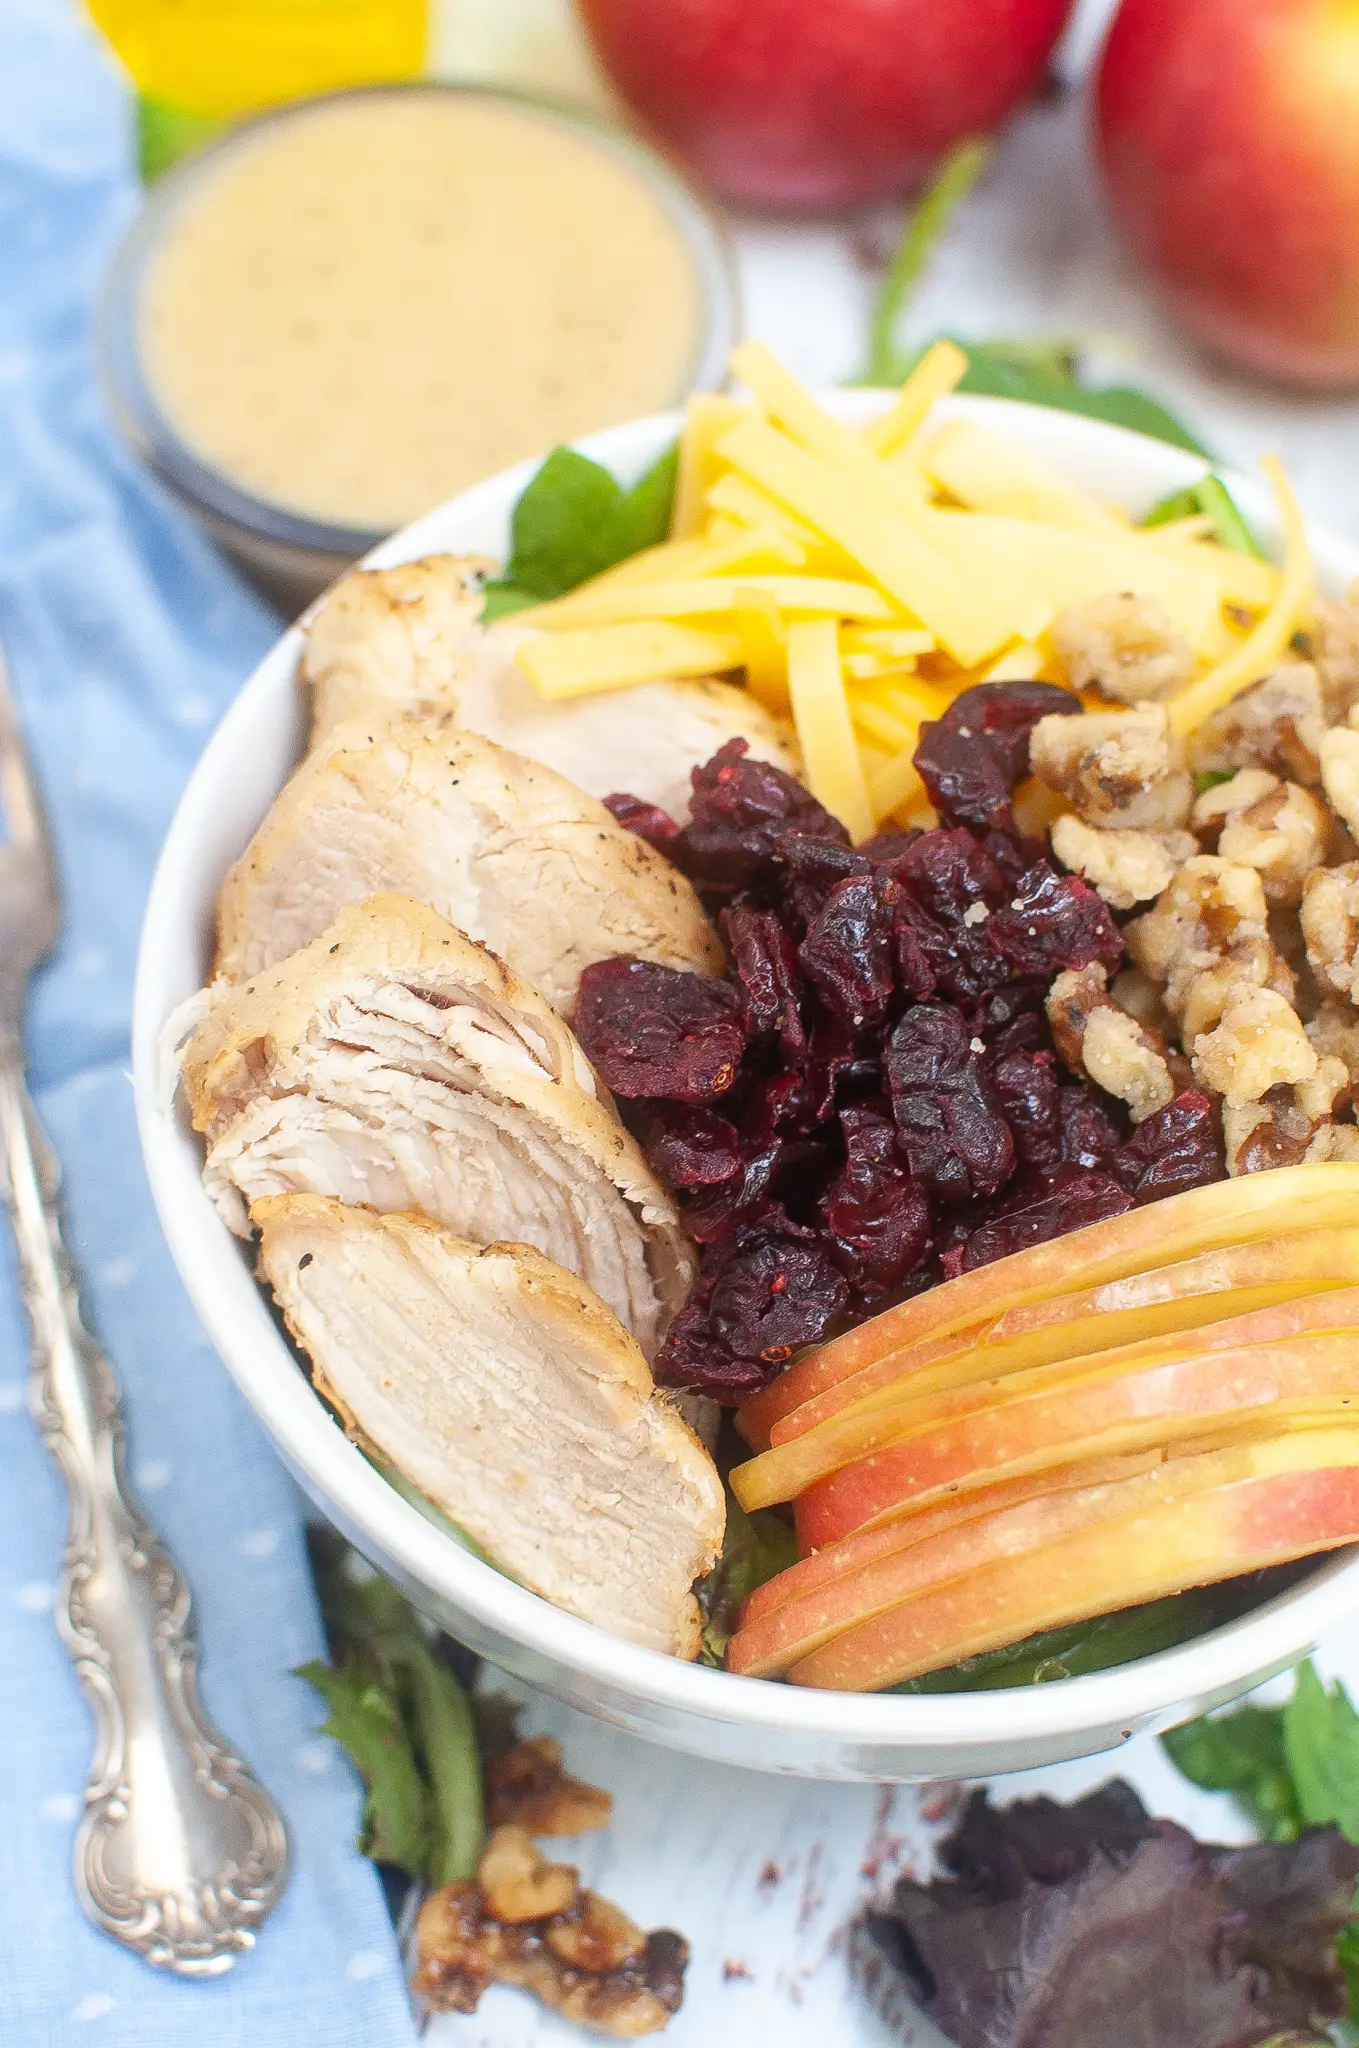 Salad topped with Chicken, cheese, walnuts, cranberries, and apples.